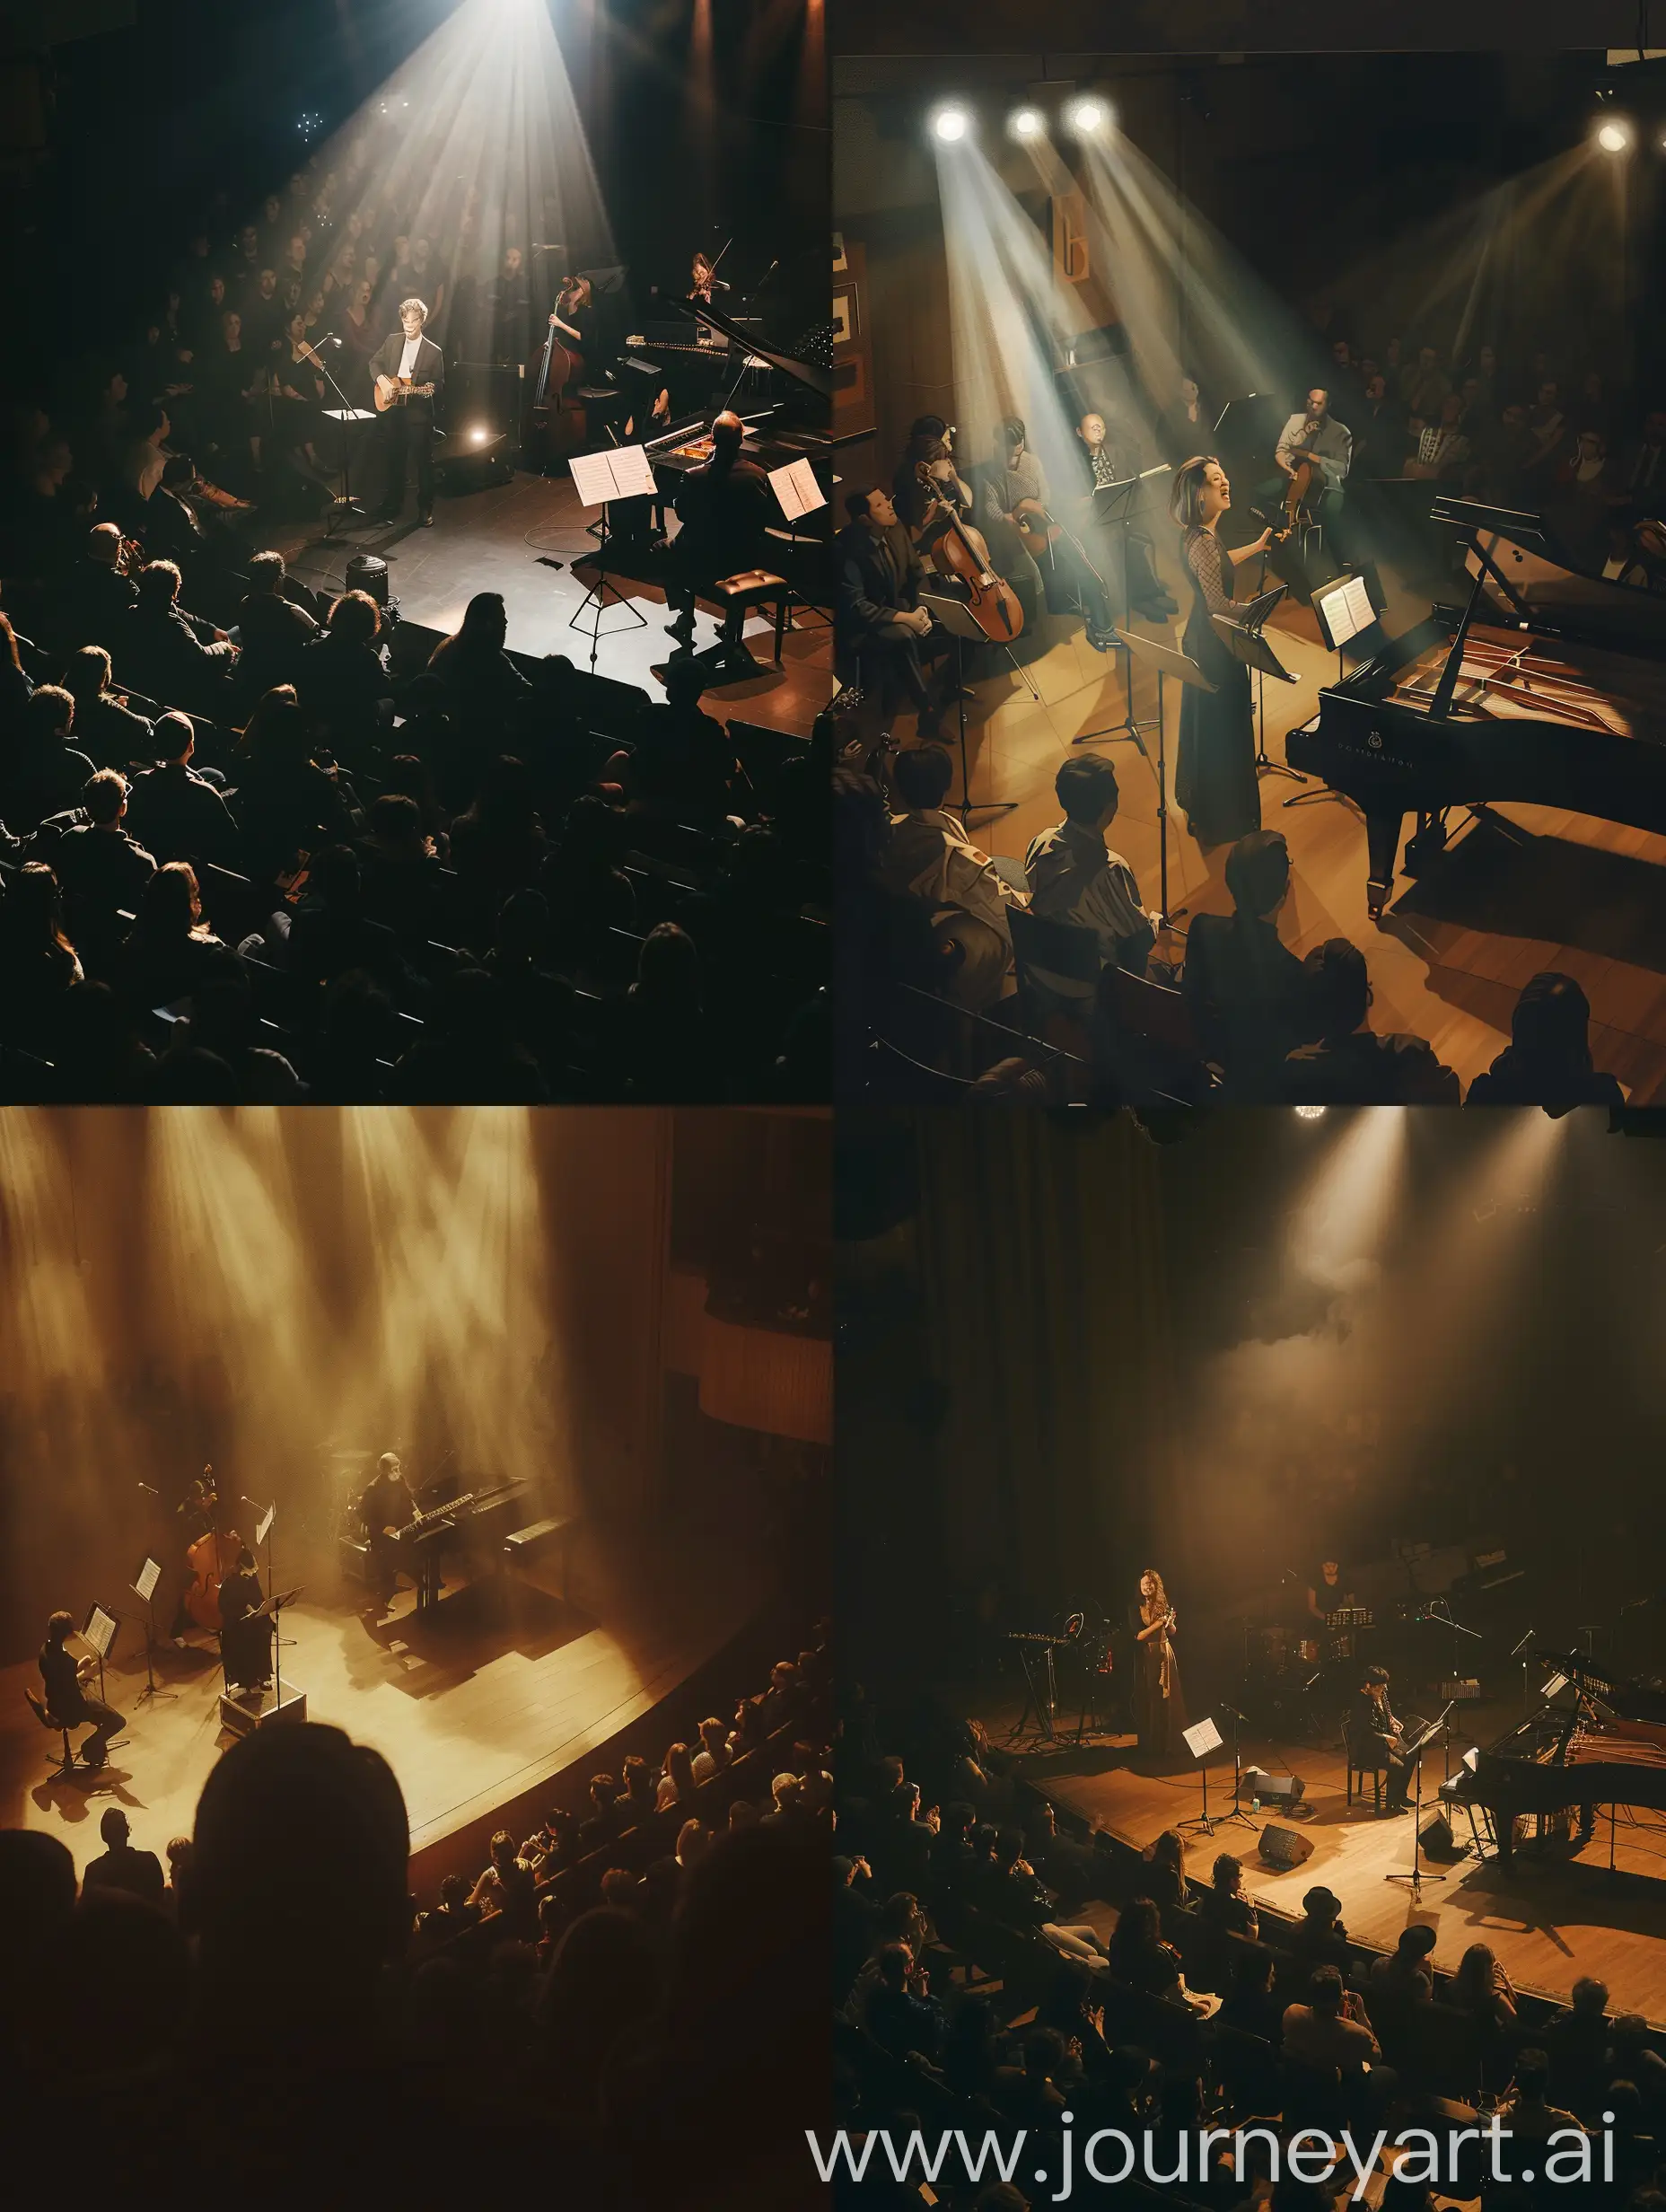 The image shows a softly lit stage with a small group of musicians and a singer at the front. The audience is viewed from a high angle, providing a privileged perspective of the concert. The stage lighting creates a concert atmosphere, albeit more intimate than a large orchestra